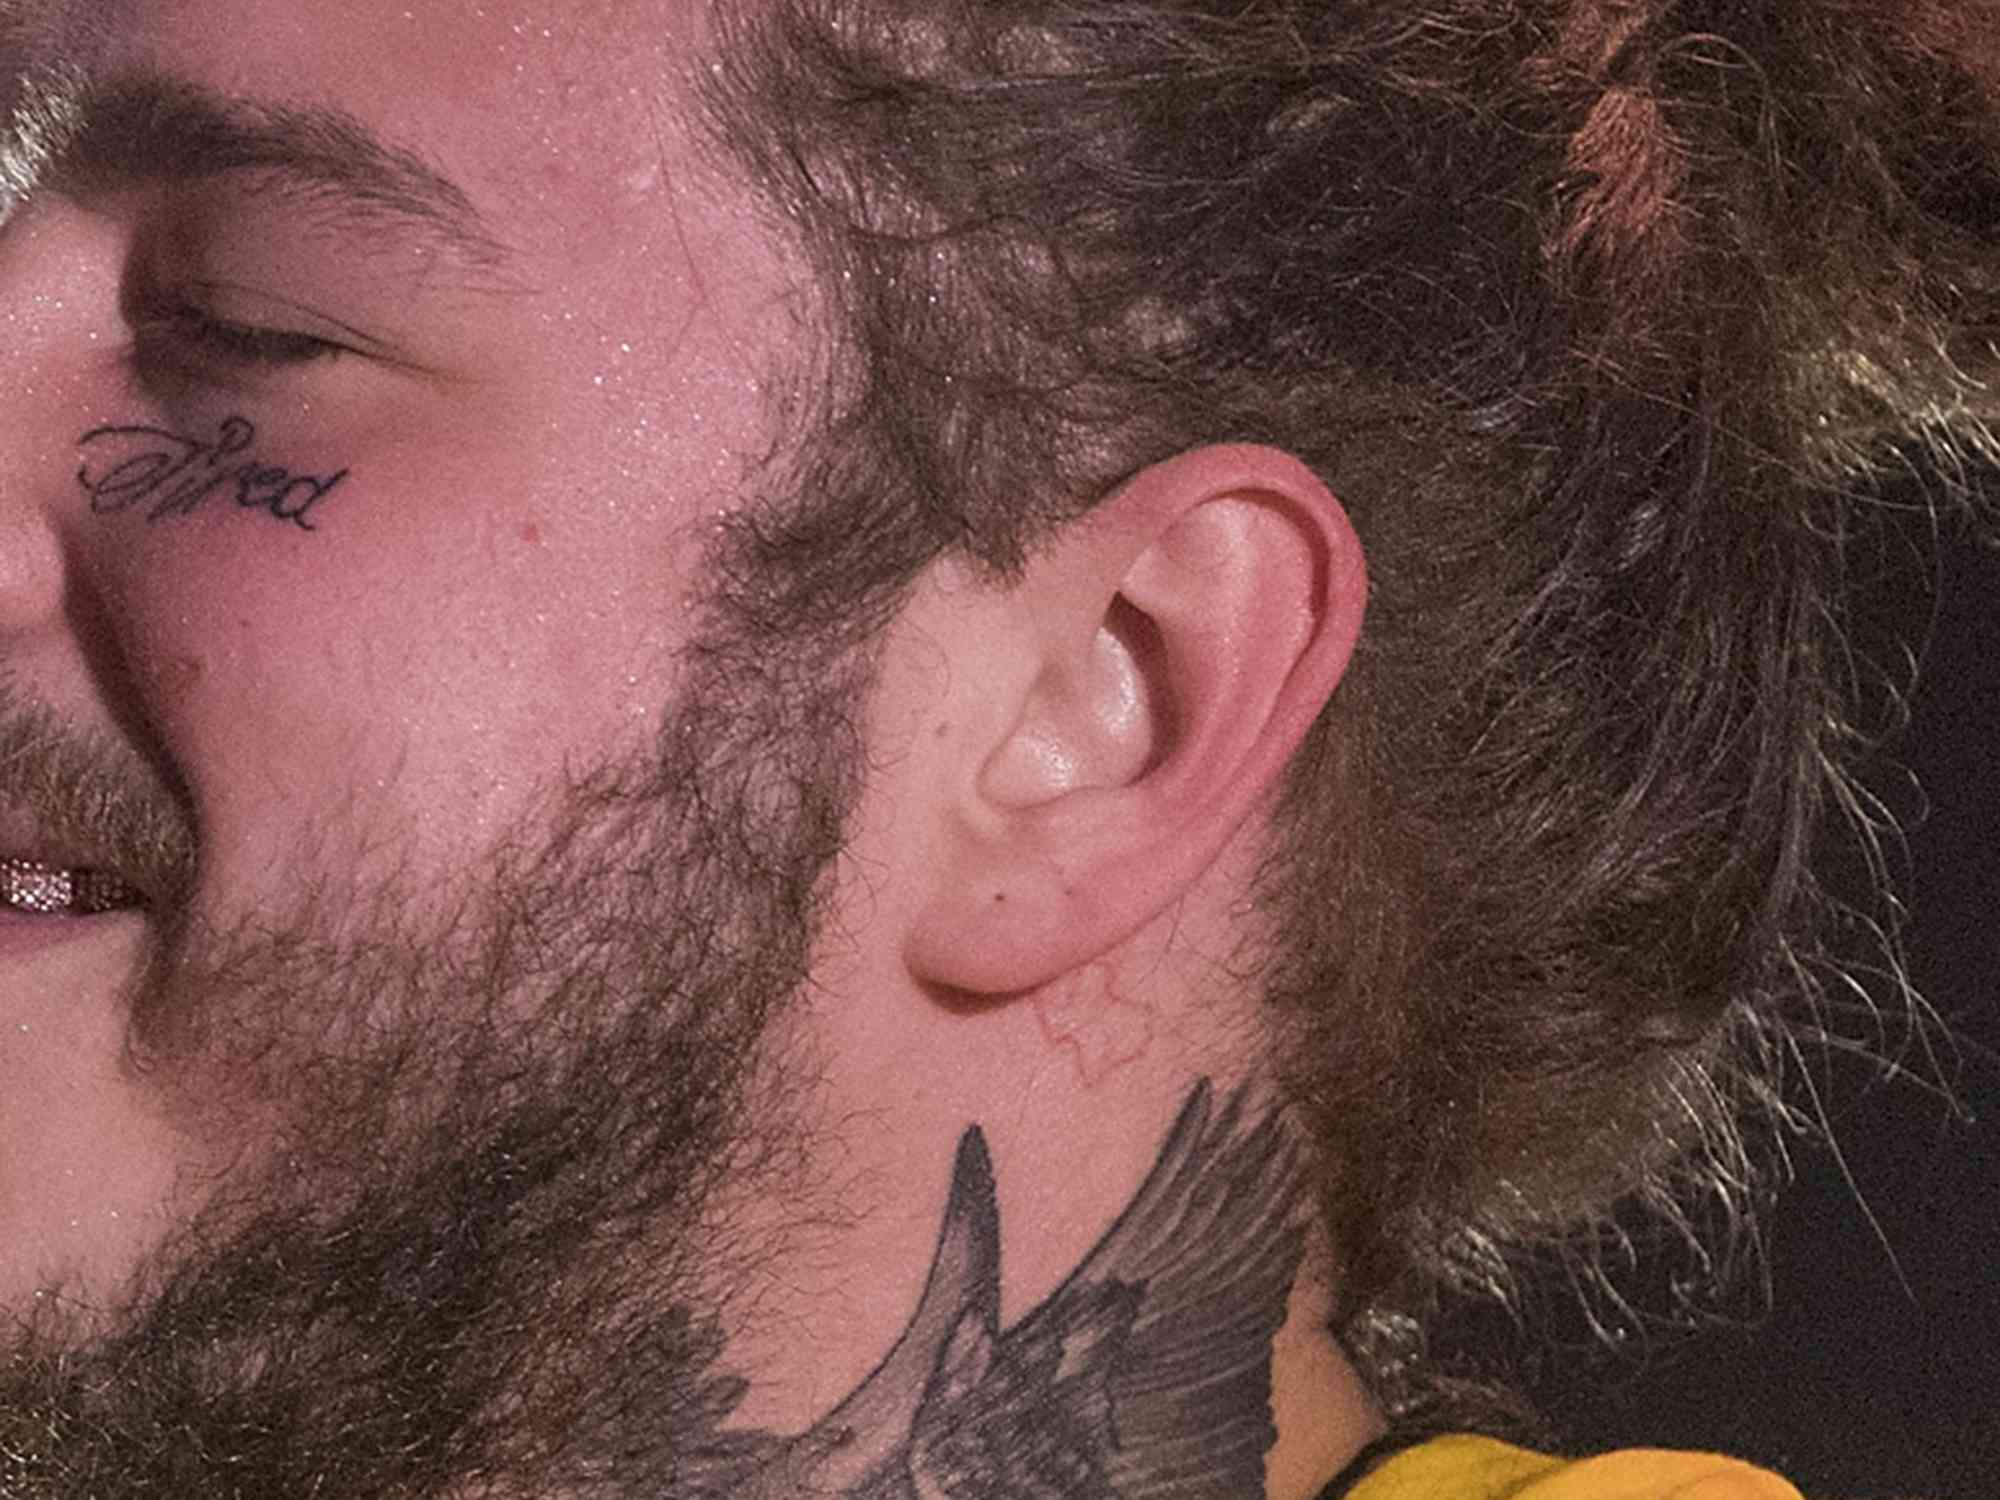 Post Malone (tattoo detail) performs in concert at Austin360 Amphitheater on June 16, 2018 in Austin, Texas. (Photo by Rick Kern/WireImage)